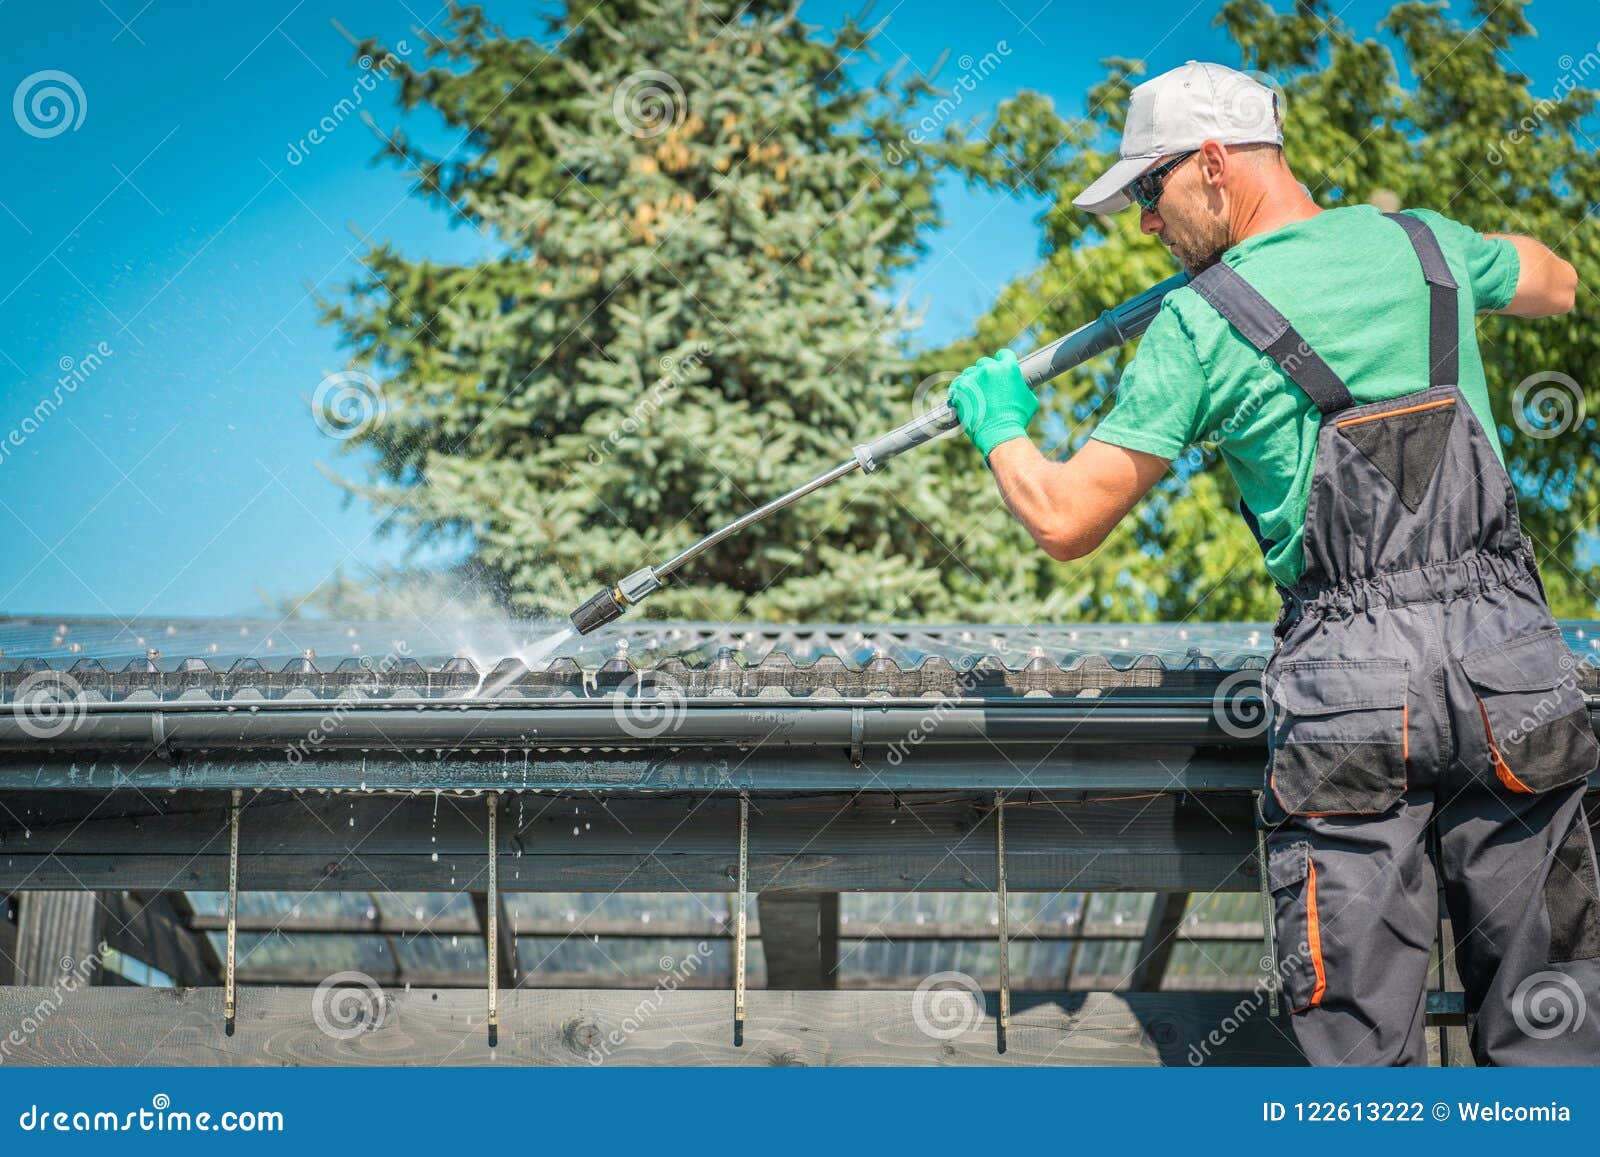 roof and gutters cleaning